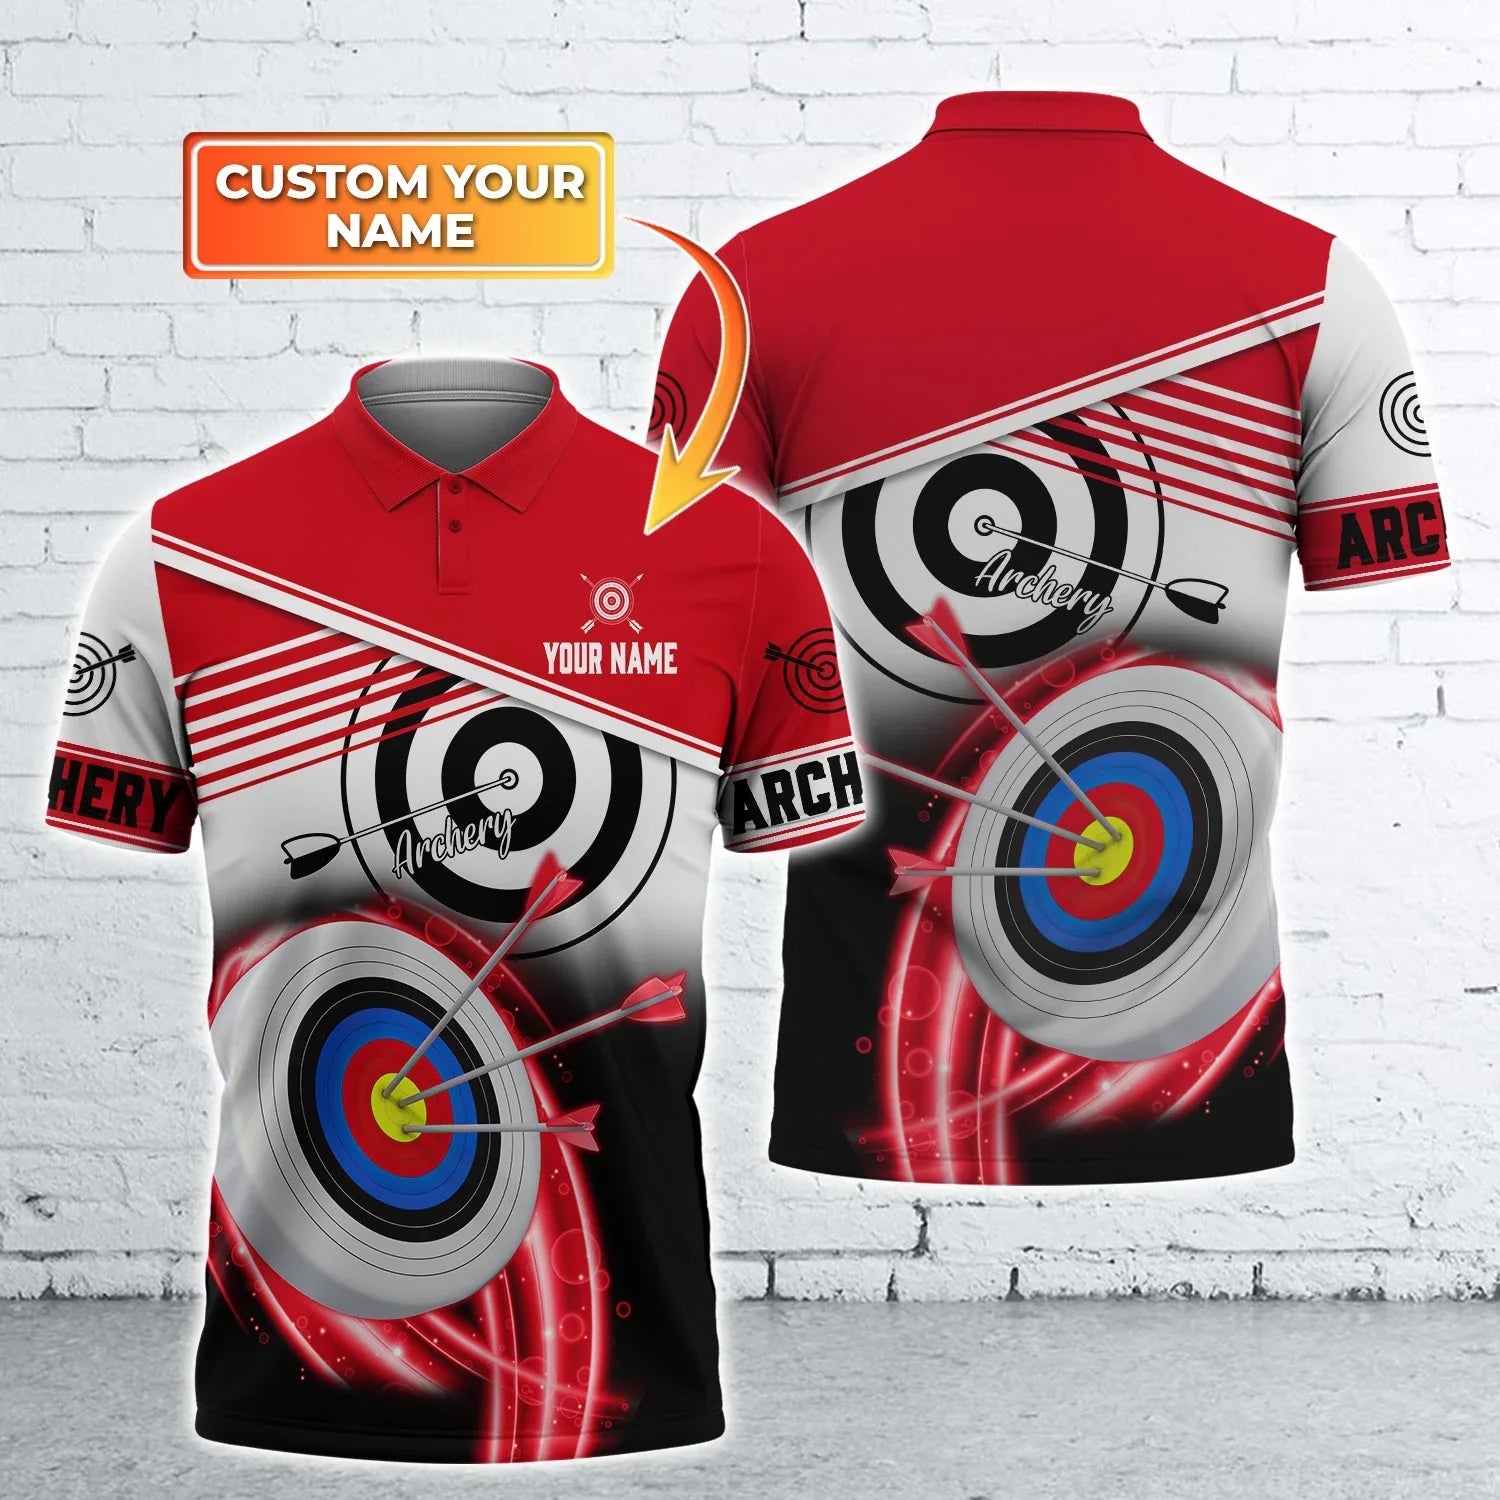 Personalized Polo Shirt For Archery Fans Sports Polo Shirt, Fully Printed Archery Polo Shirt Men’s And Women’s Outfit